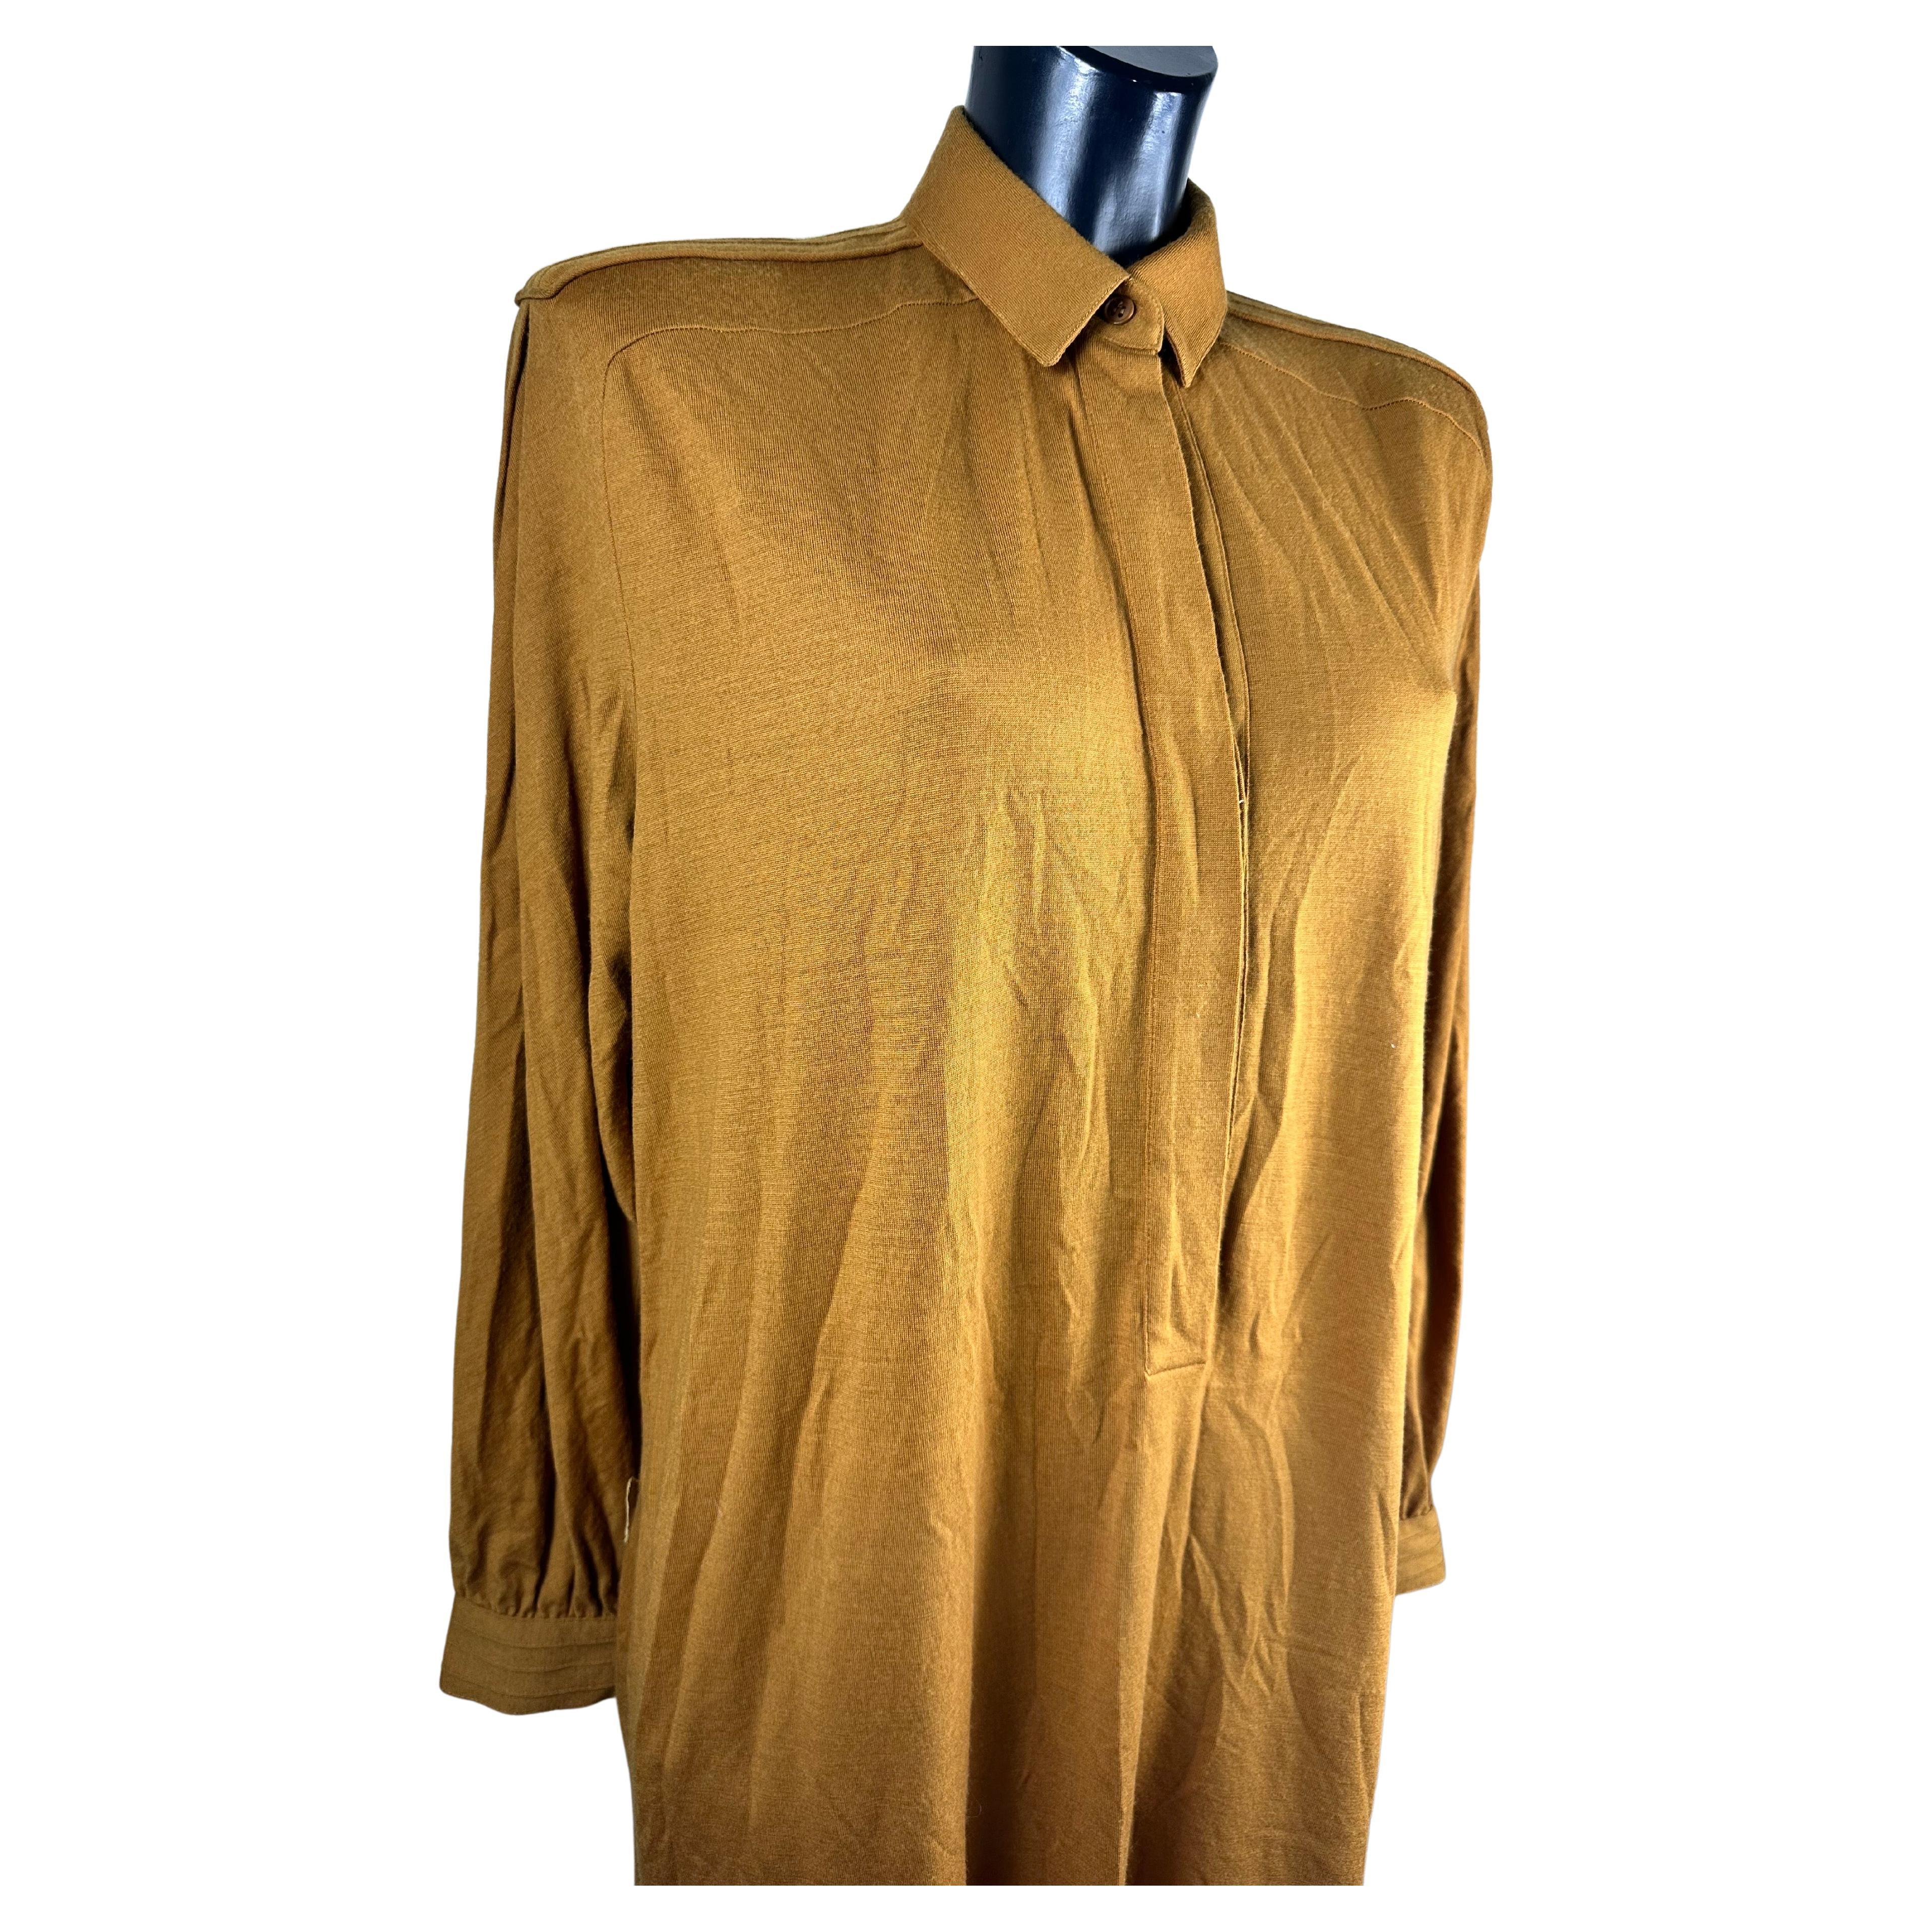 Christian Dior 70s wool dress
Never used
Size 46 mustard color
Beautiful worn over or with a belt.
Measures :
Length 123cm
Shoulder 46cms
Dior's refinement in a timeless dress dates back to the 70s, the collection that seeks comfort and femininity.